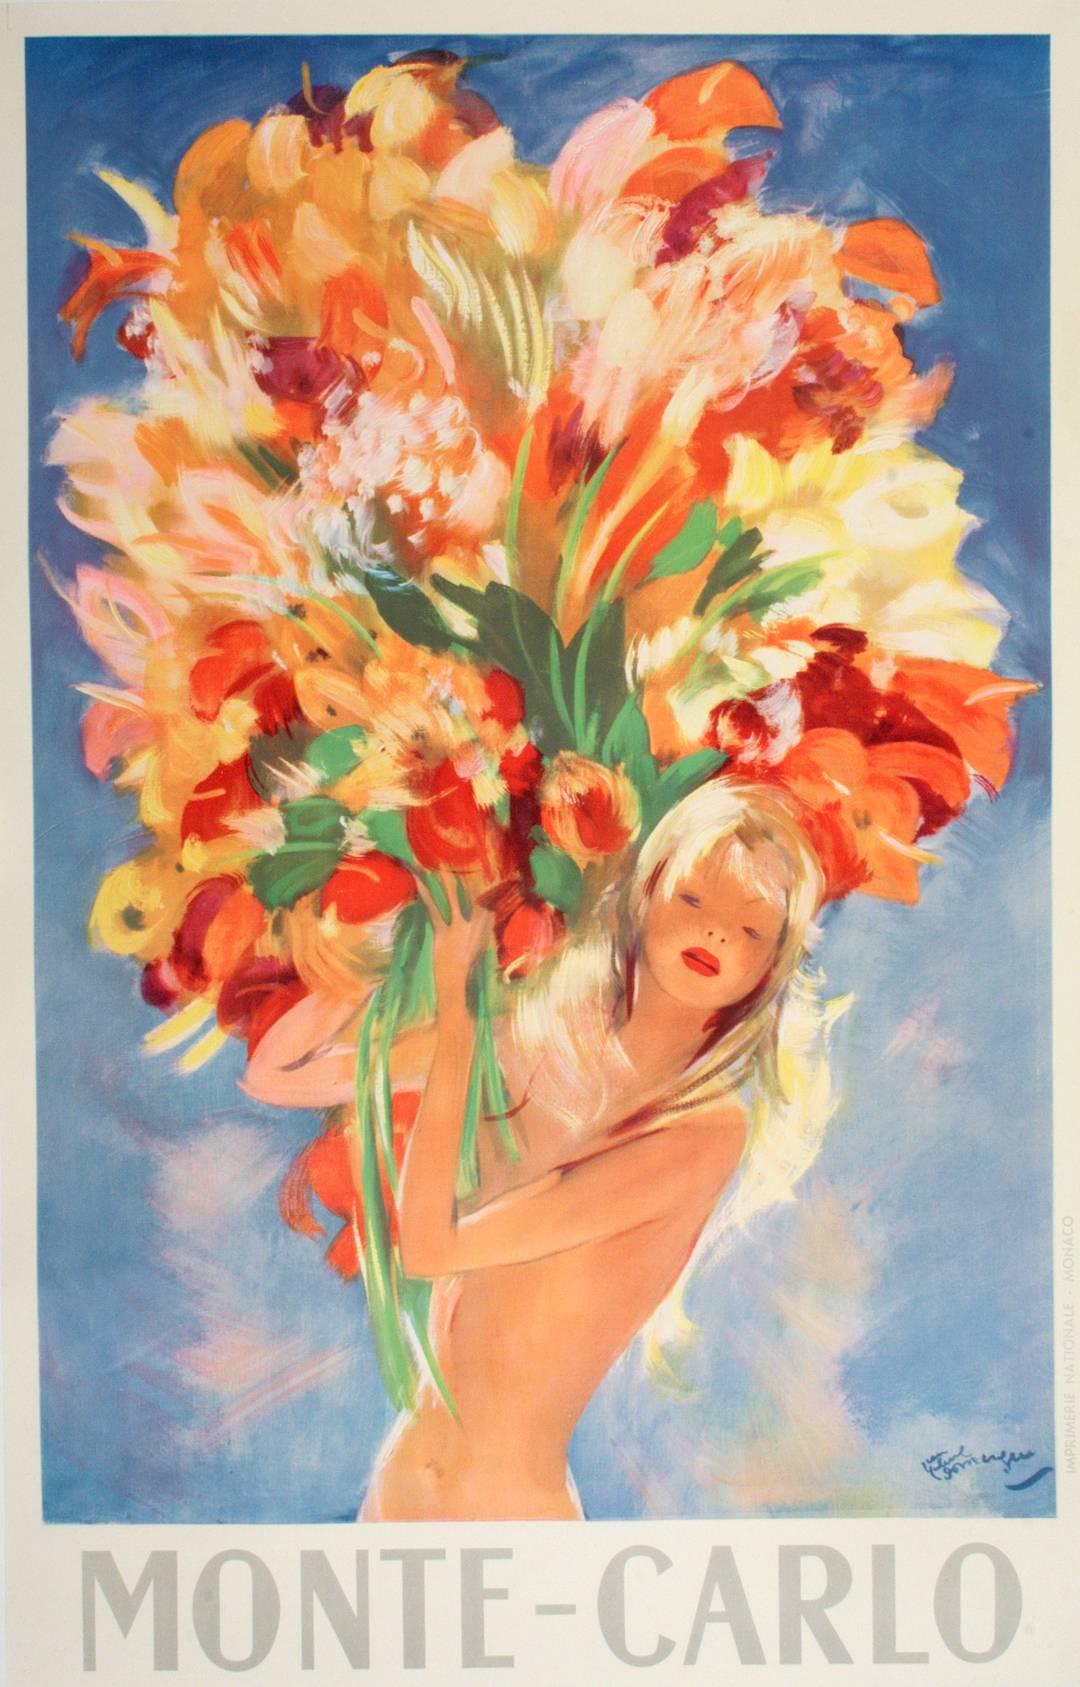 Original Monte Carlo Girl Holding Flowers Vintage Poster by Domergue c1950